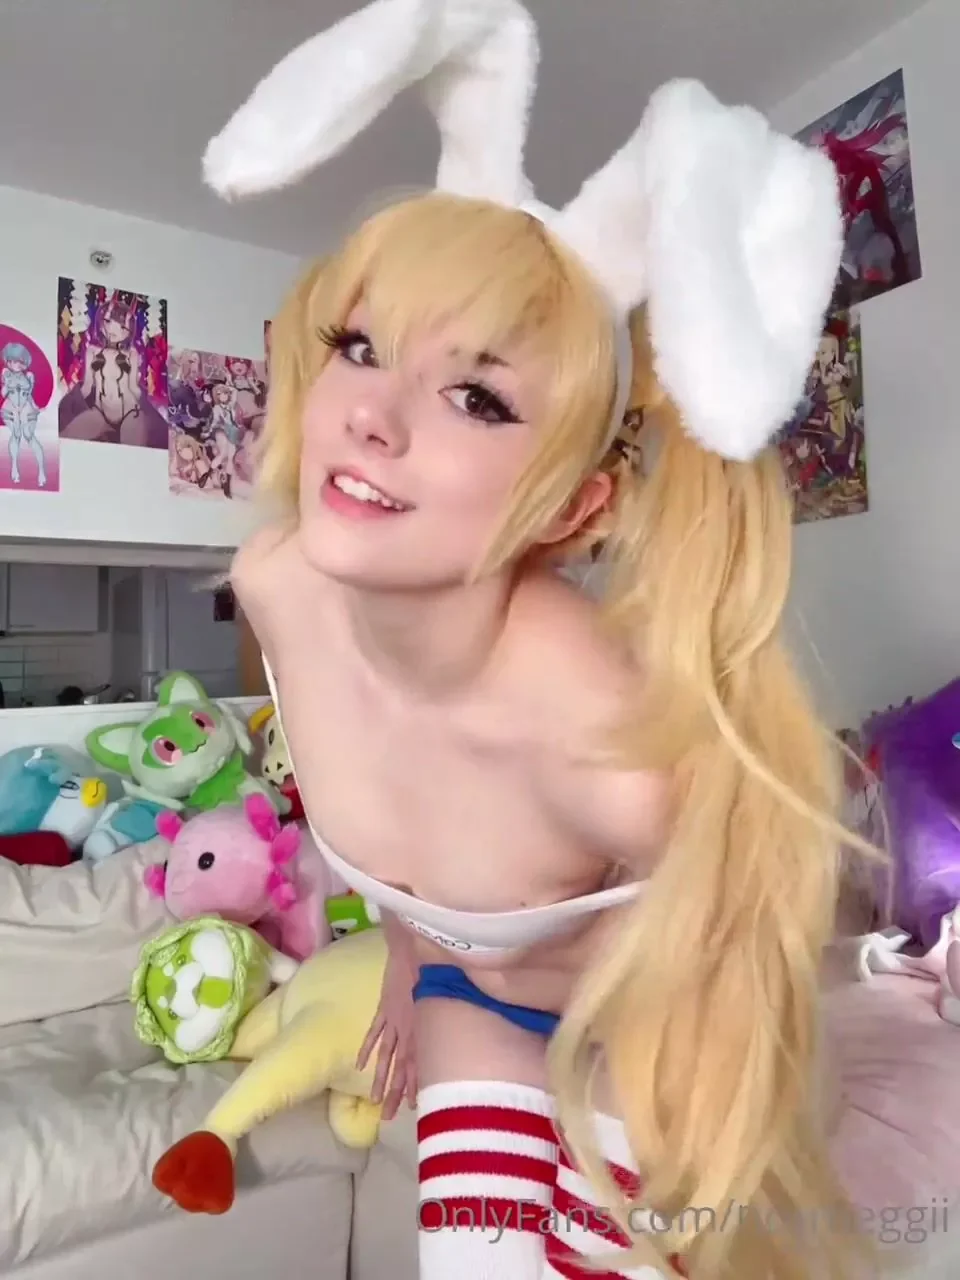 Notmegii Flexible Petite Expose Her Tiny Booty Cheeks In Cosplay Onlyfans Video